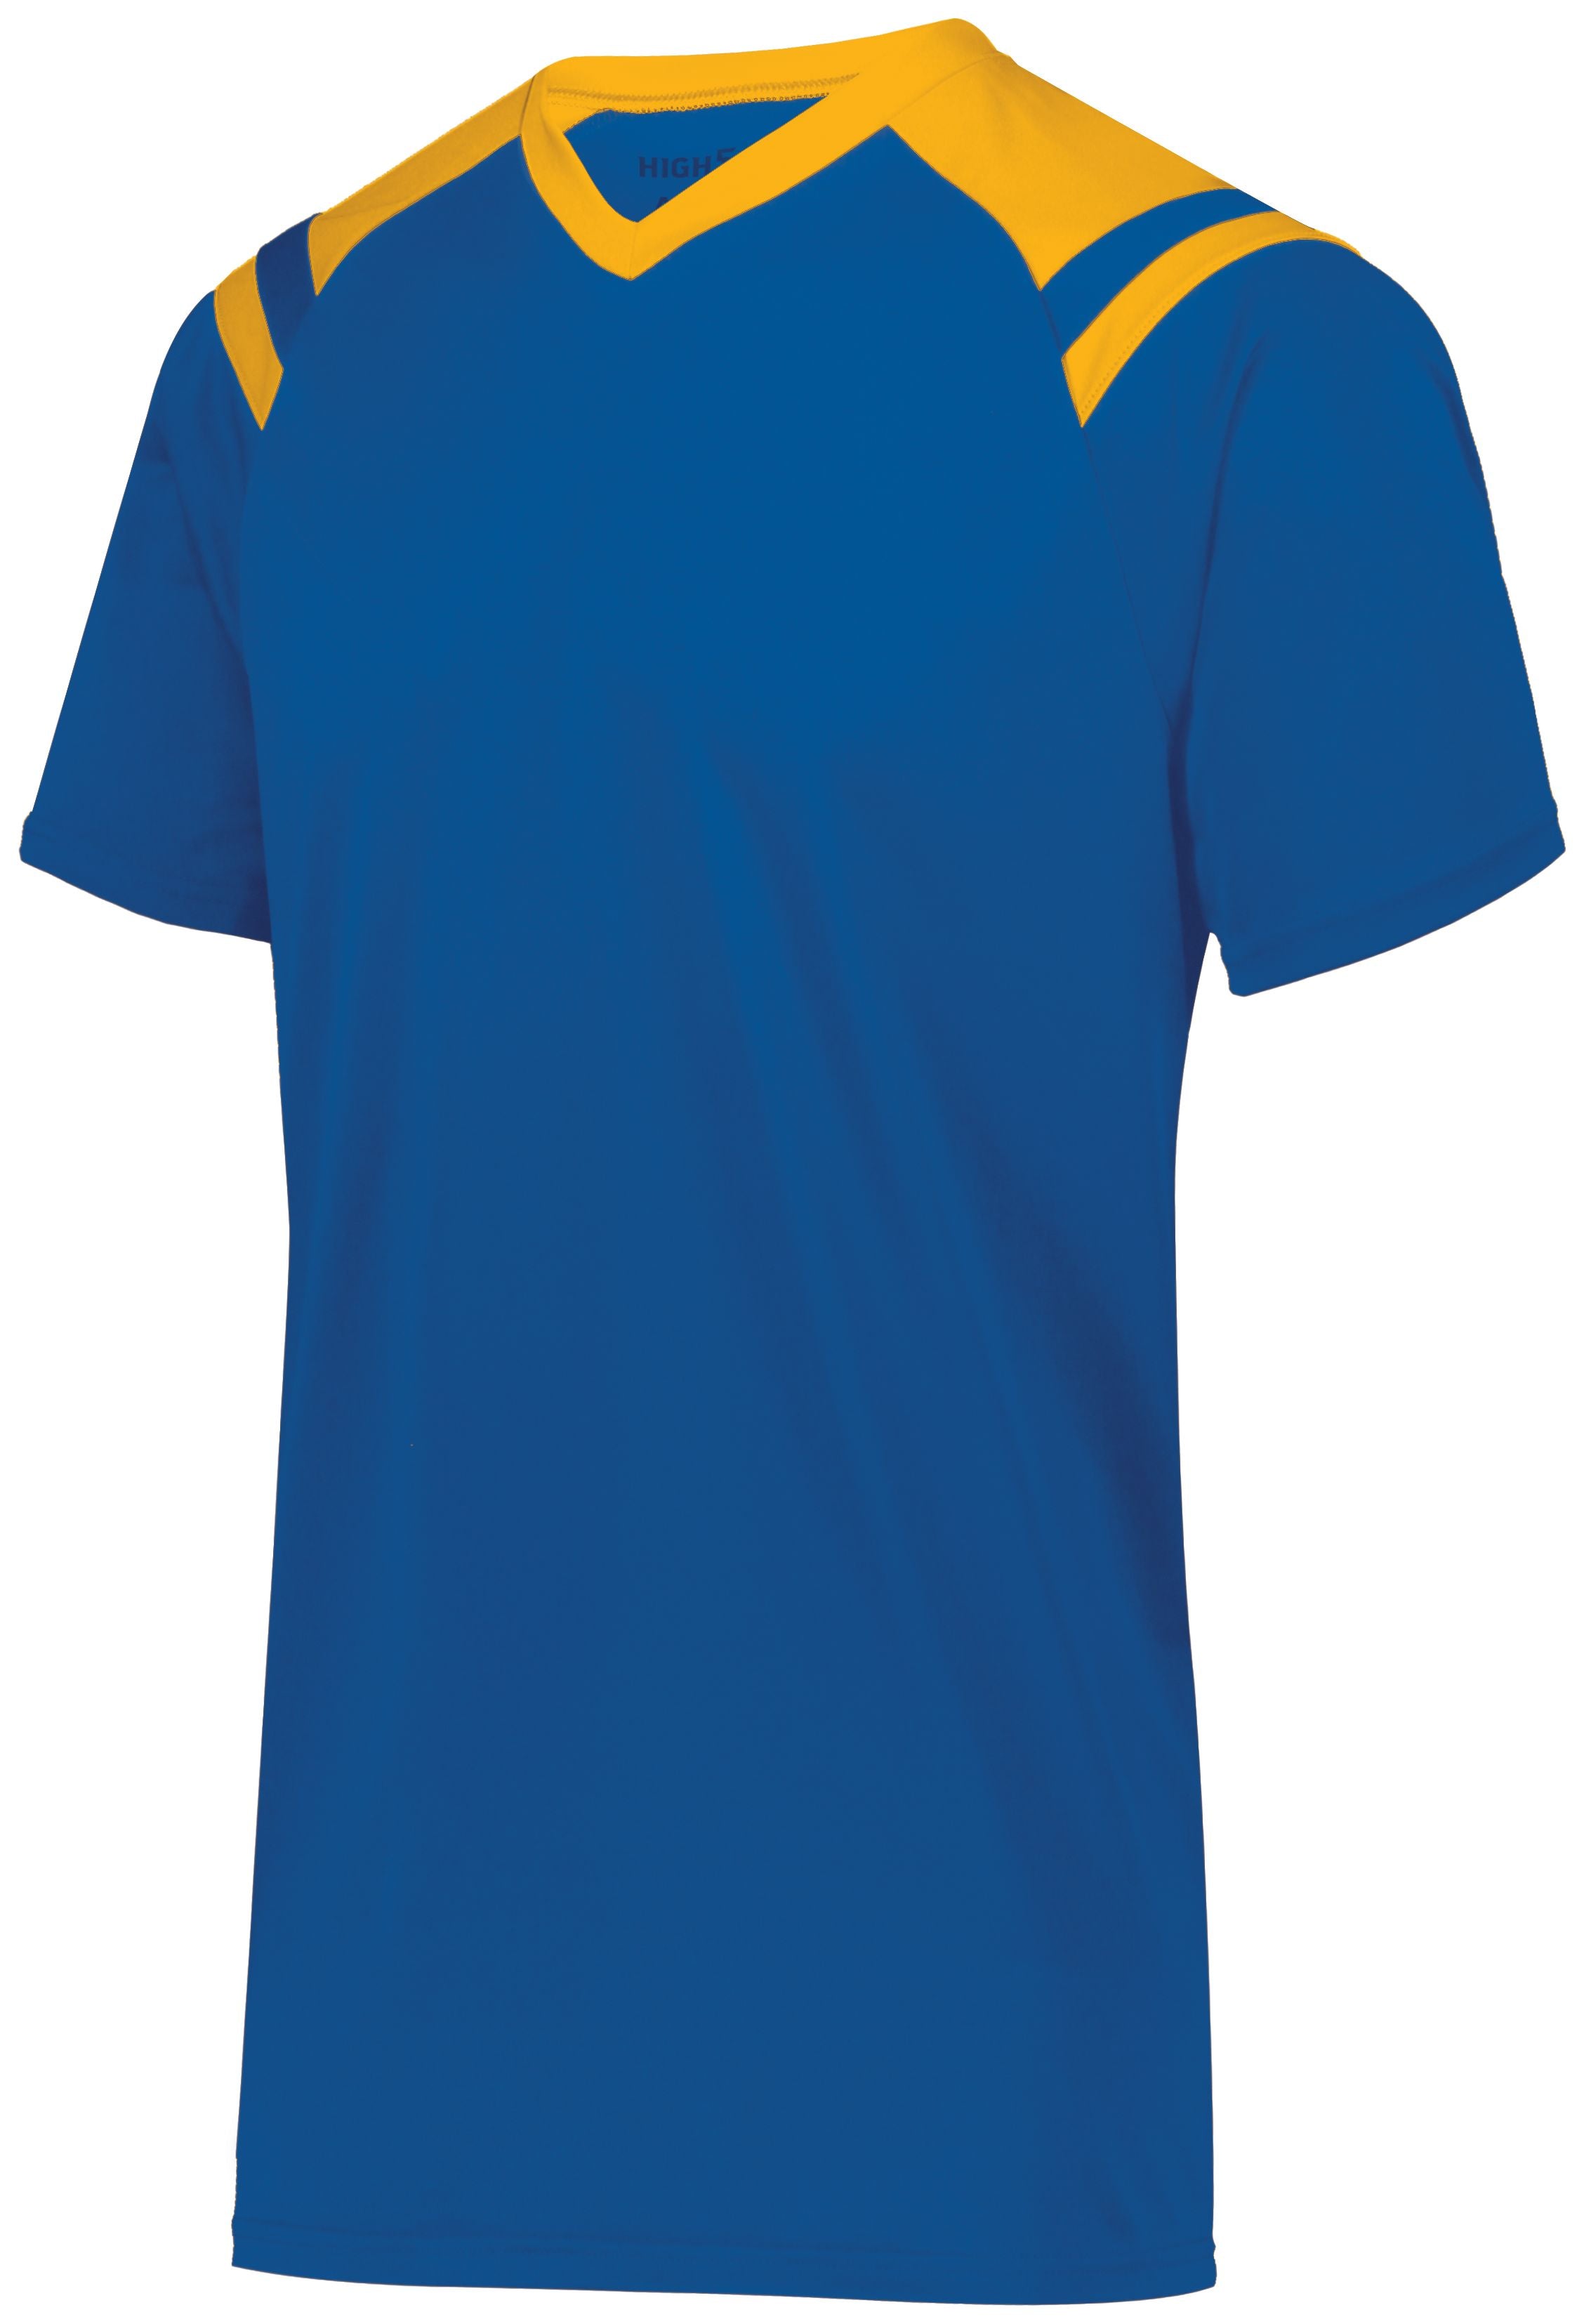 High 5 Youth Sheffield Jersey in Royal/Gold  -Part of the Youth, Youth-Jersey, High5-Products, Soccer, Shirts, All-Sports-1, Sheffield-Soccer-Jerseys product lines at KanaleyCreations.com